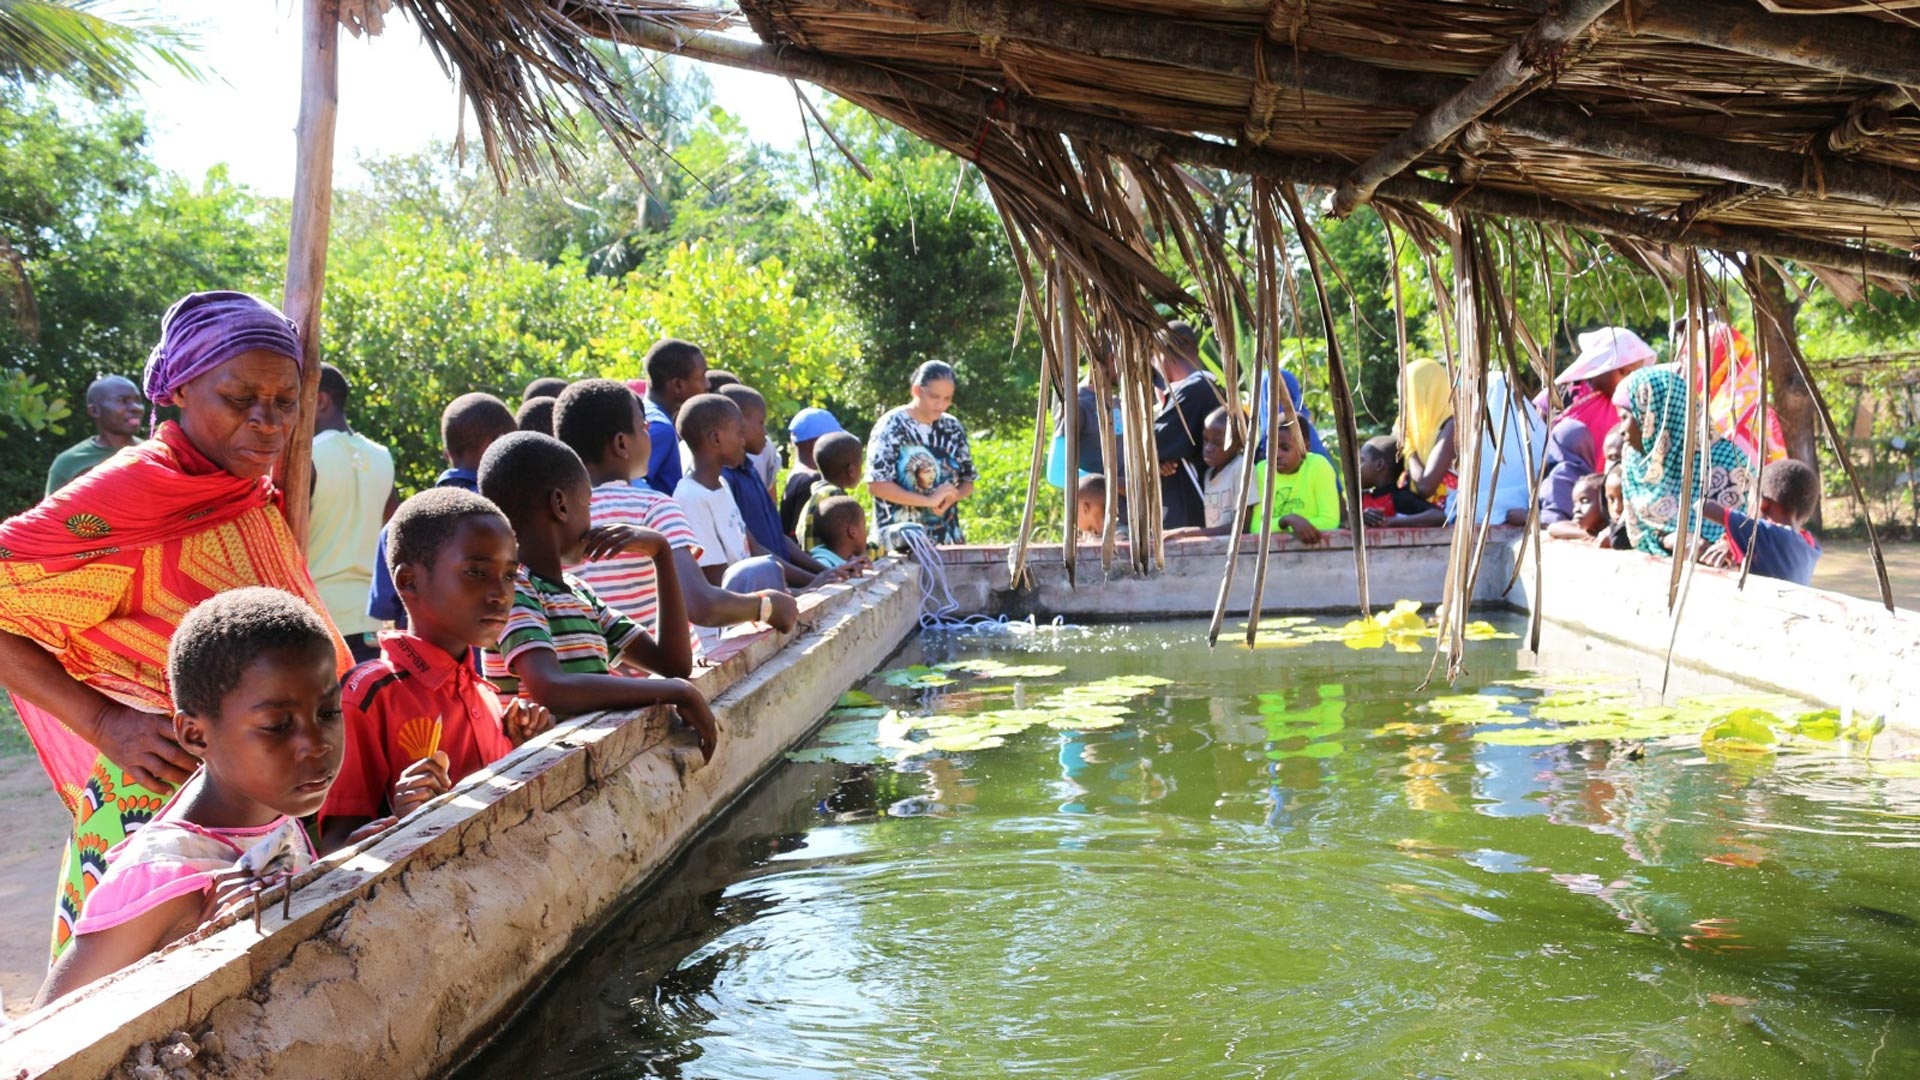 Children and elderly villagers stand around a stone fish rearing tank under a thatched roof and look into the green water.